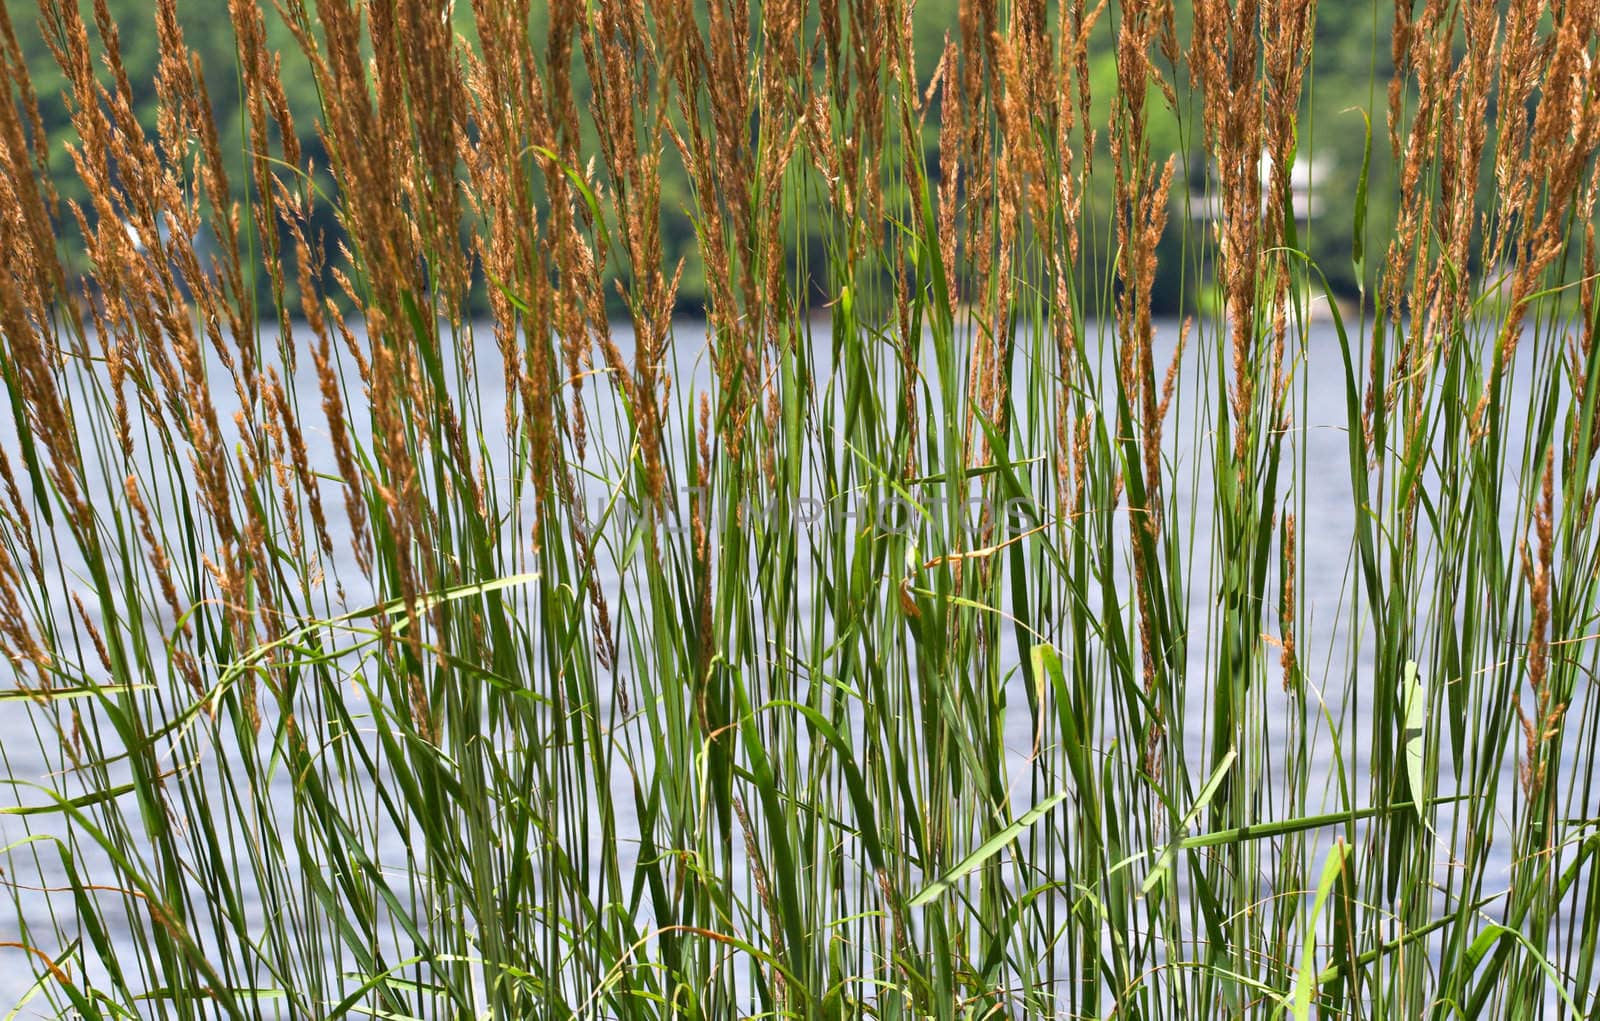 Tall cattails in front of a lake. Focus is on cattails with lake and background out of focus.